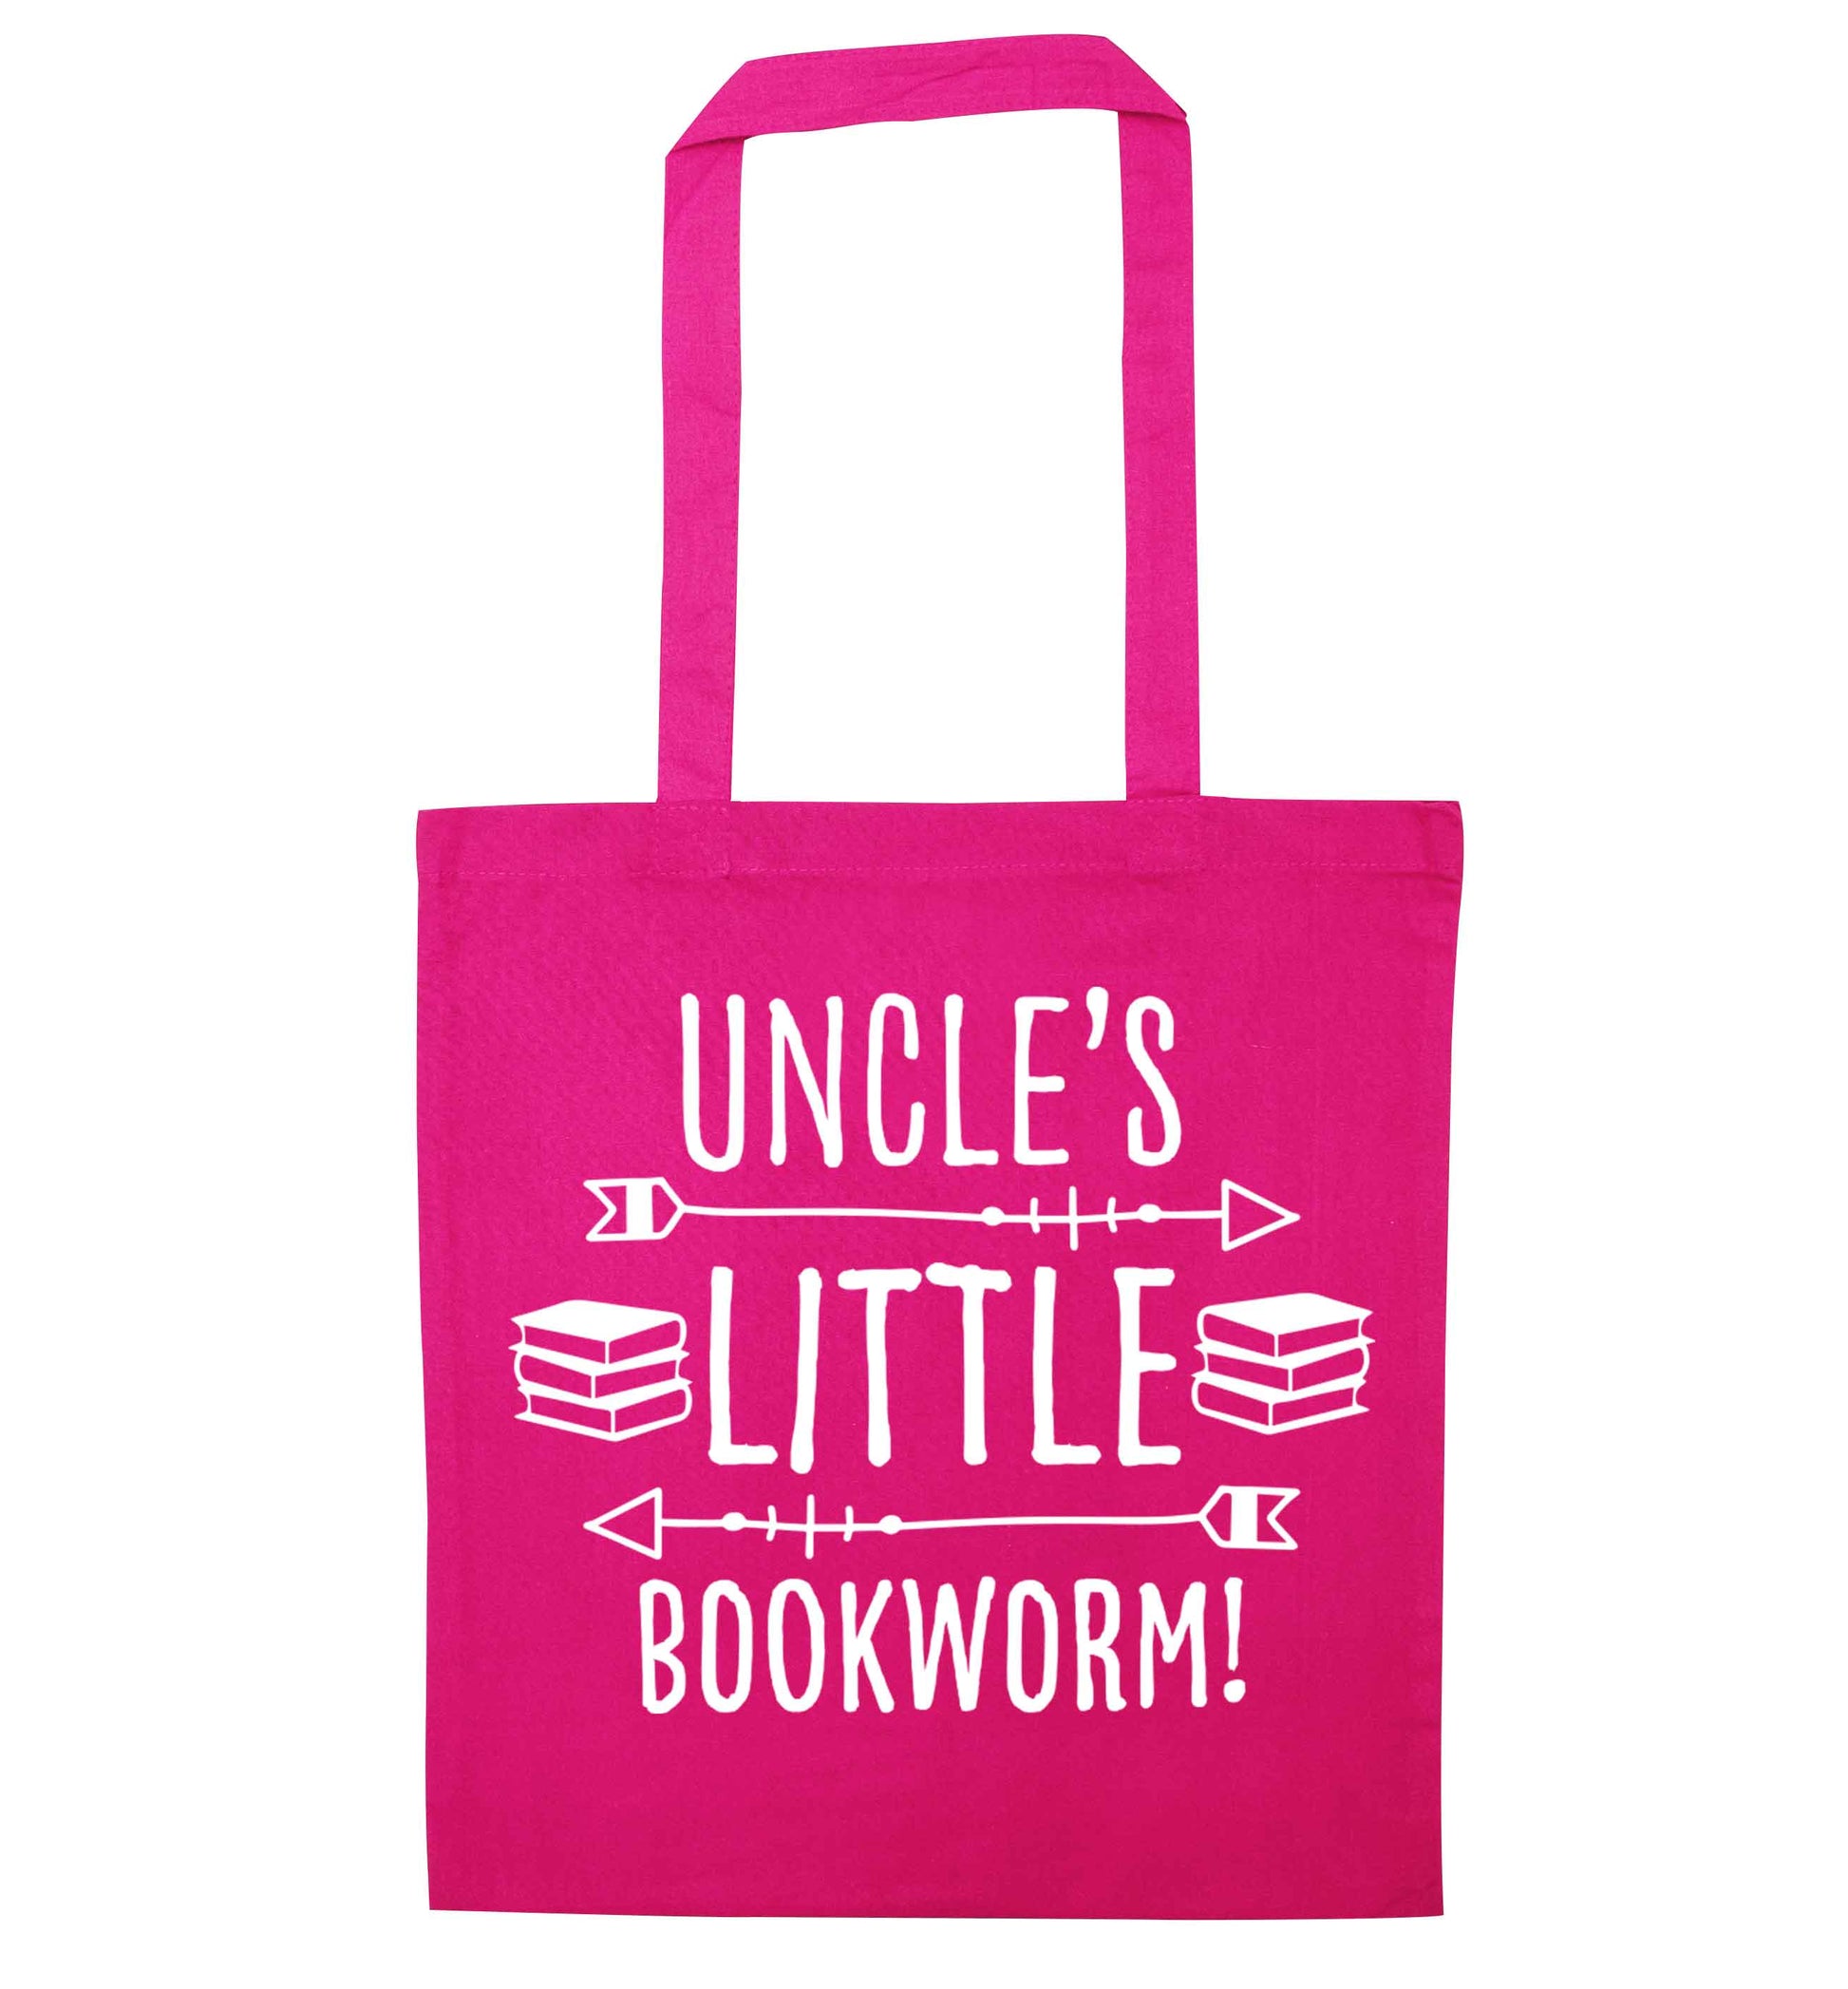 Uncle's little bookworm pink tote bag